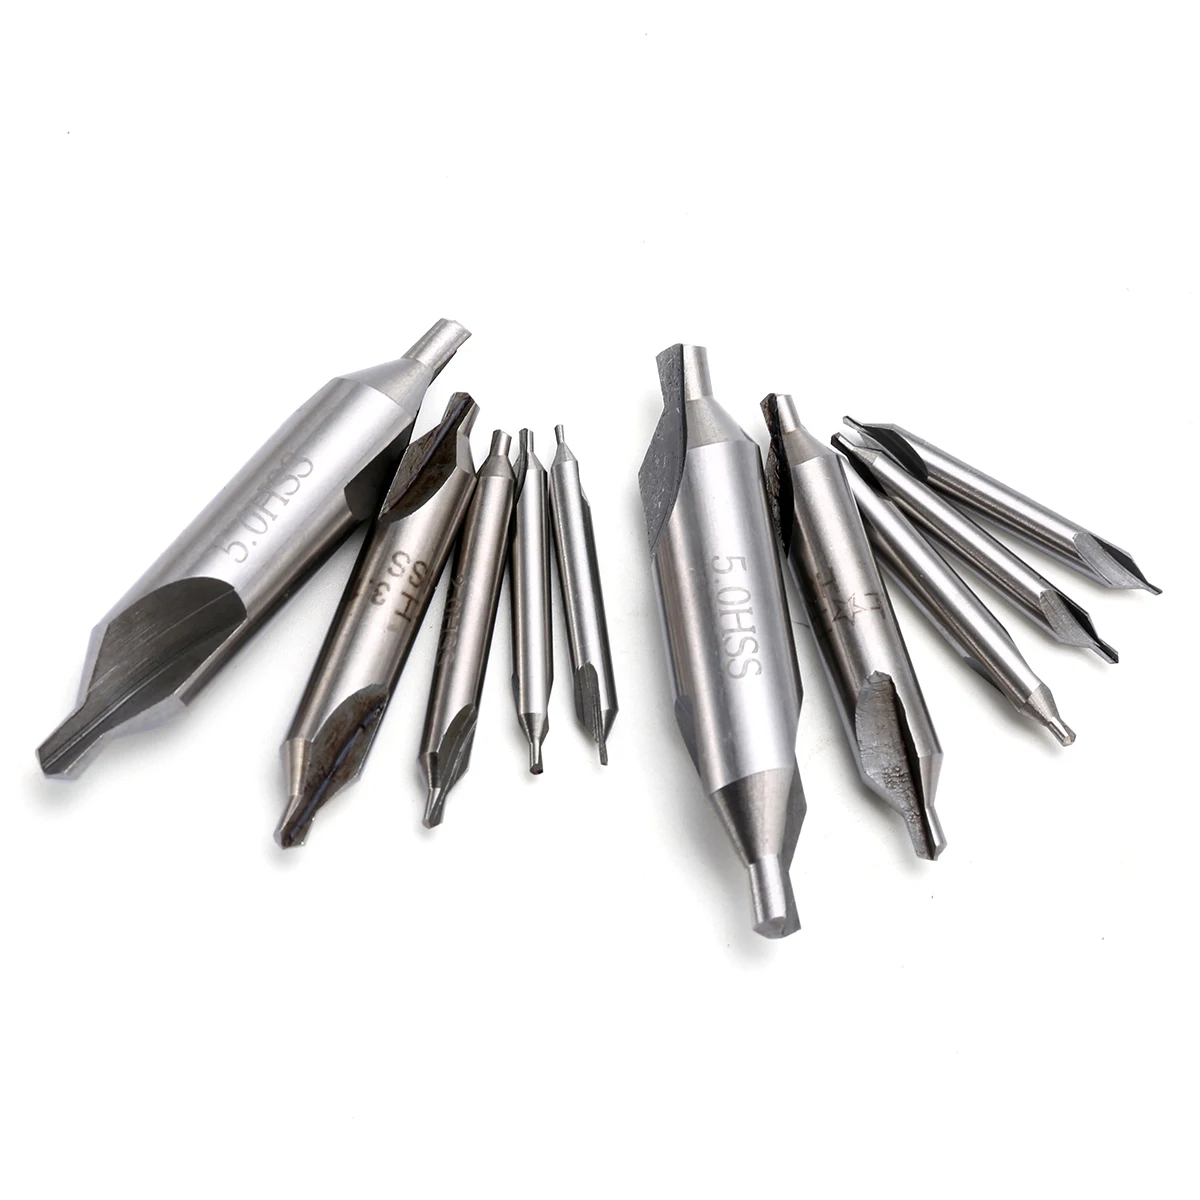  10pcs 60 Degree Combined Countersink Center Drills Bits 1/1.5/2/3.15/5mm High Speed Steel For Power